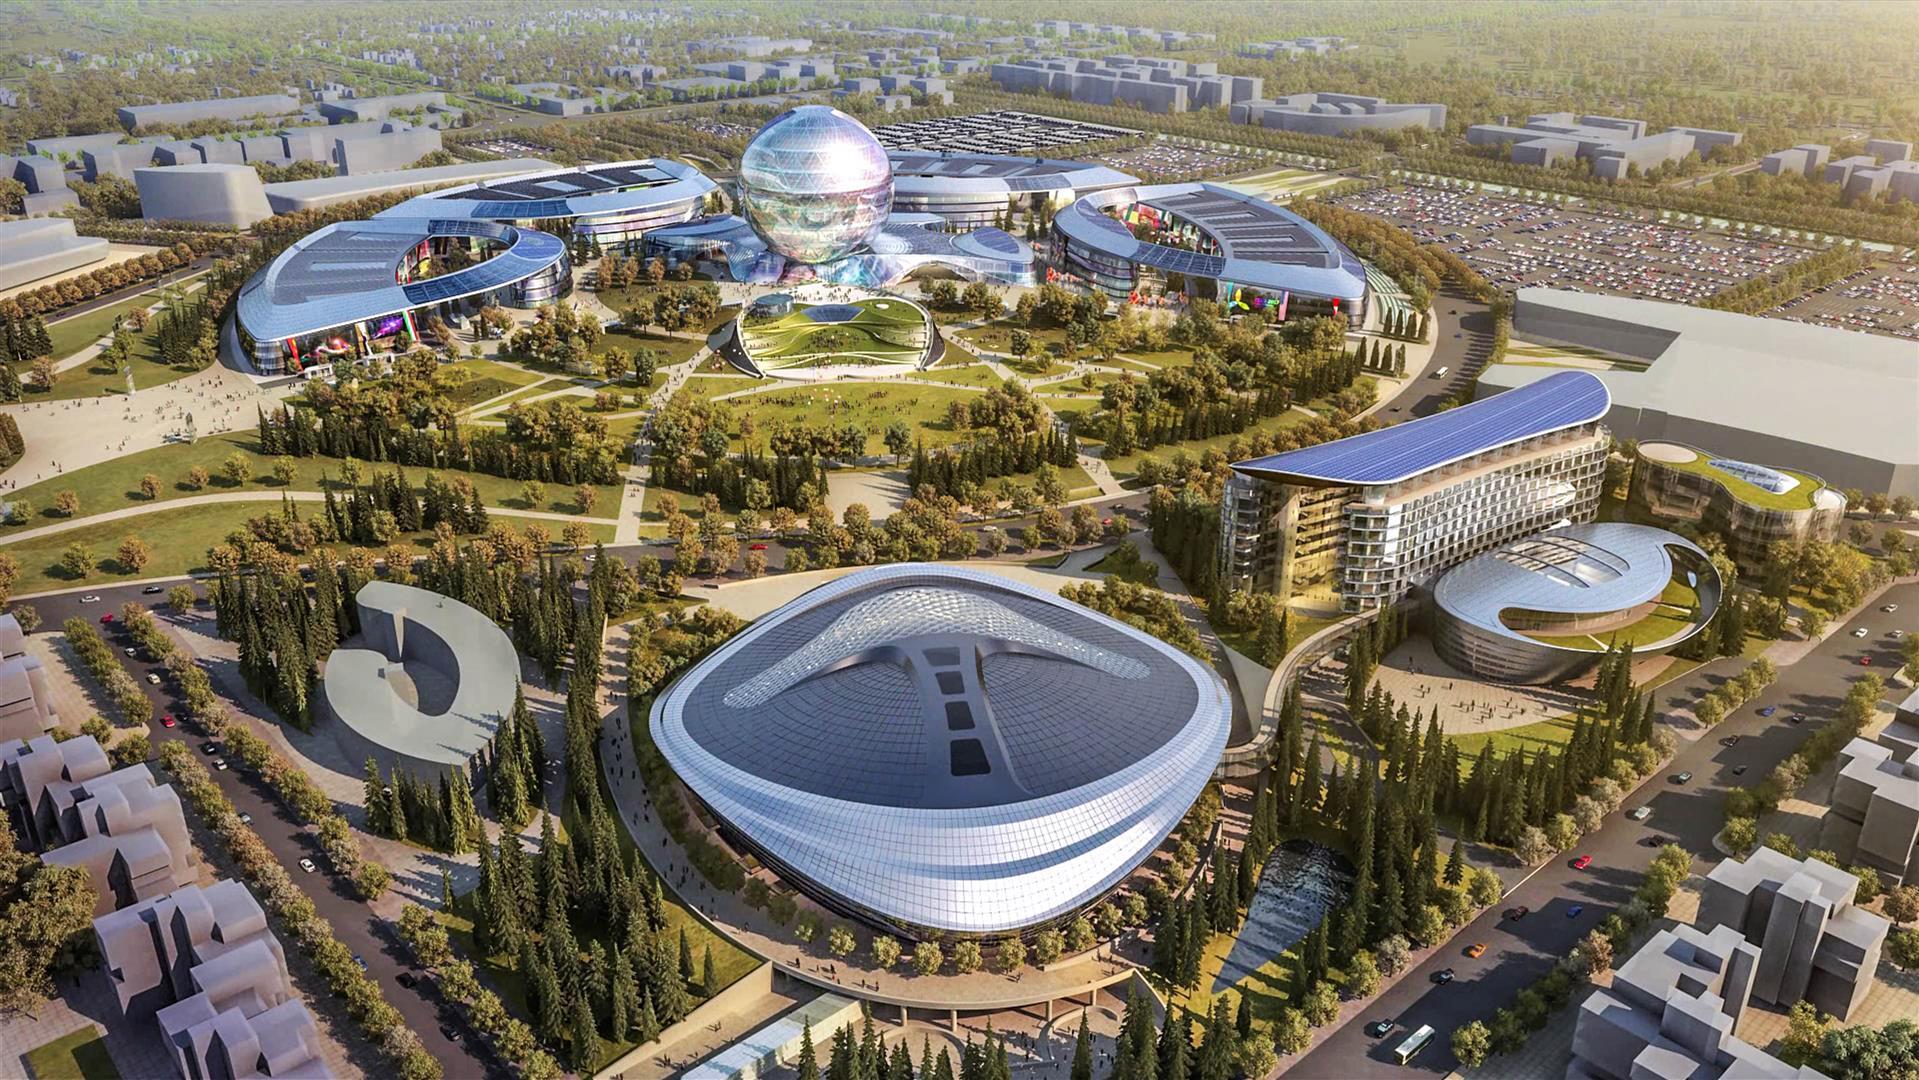 Futuristic Expo buildings among park land in Astana